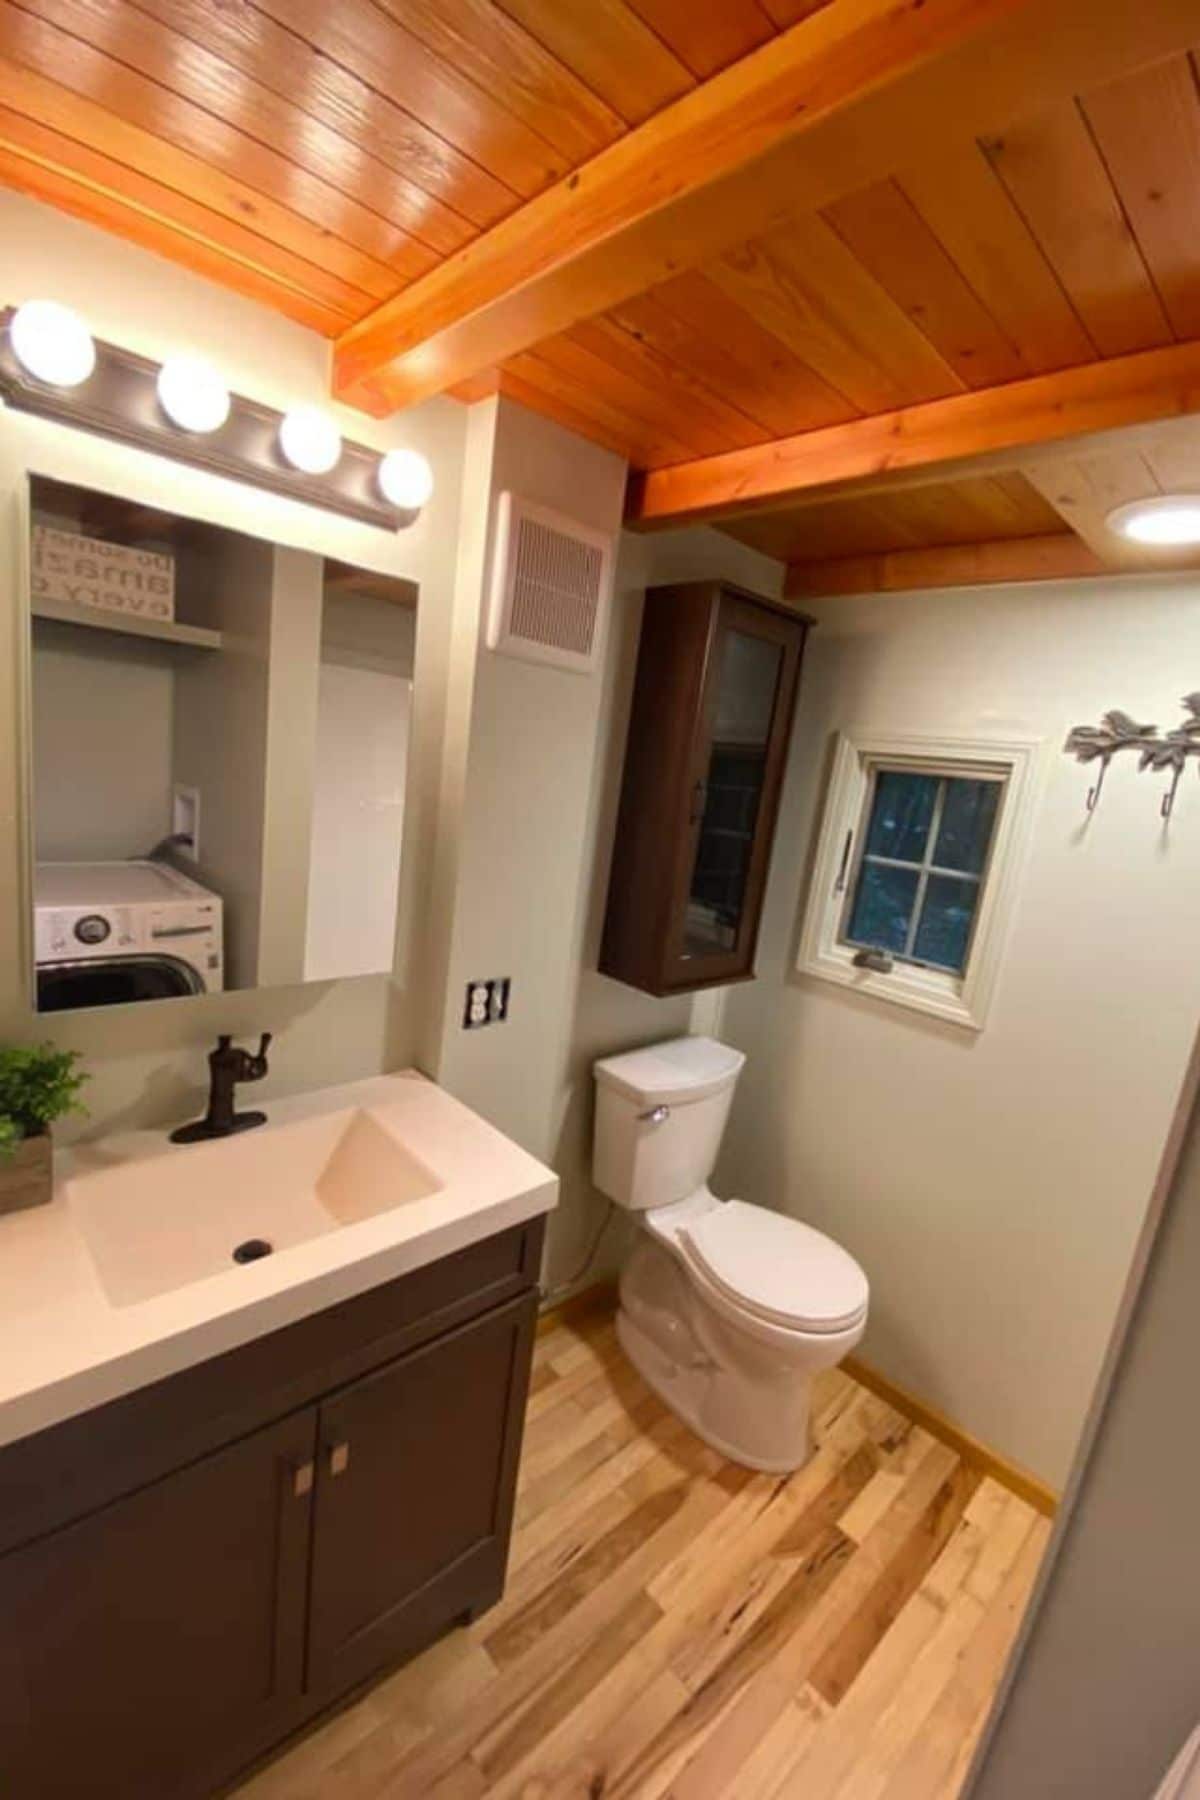 bathroom with toilet on far wall and vanity with lights in left corner